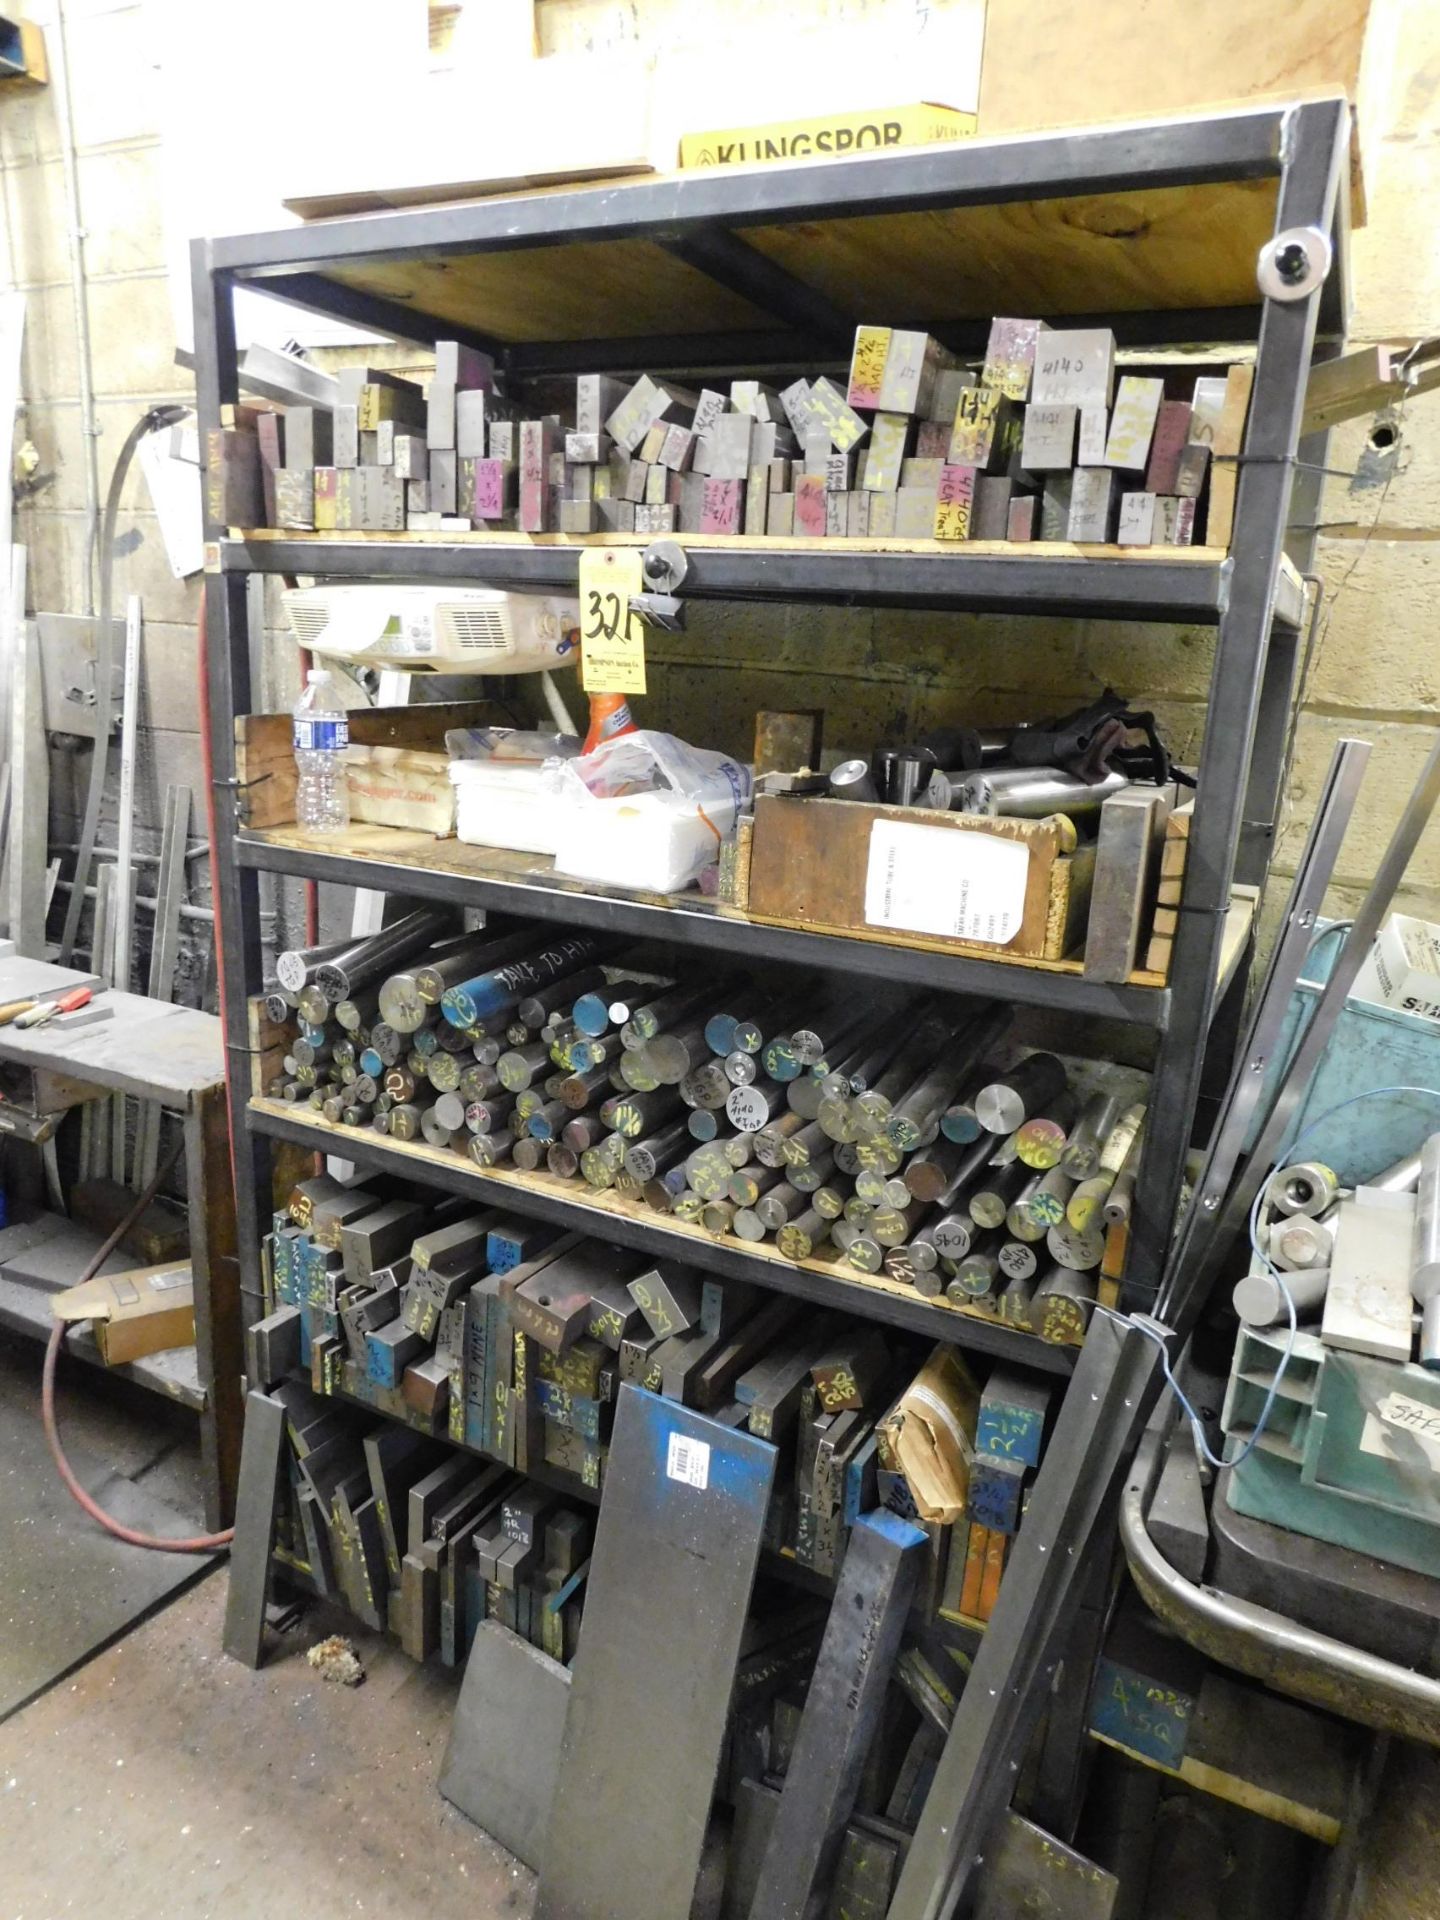 Shelving and Contents of Miscellaneous Steel